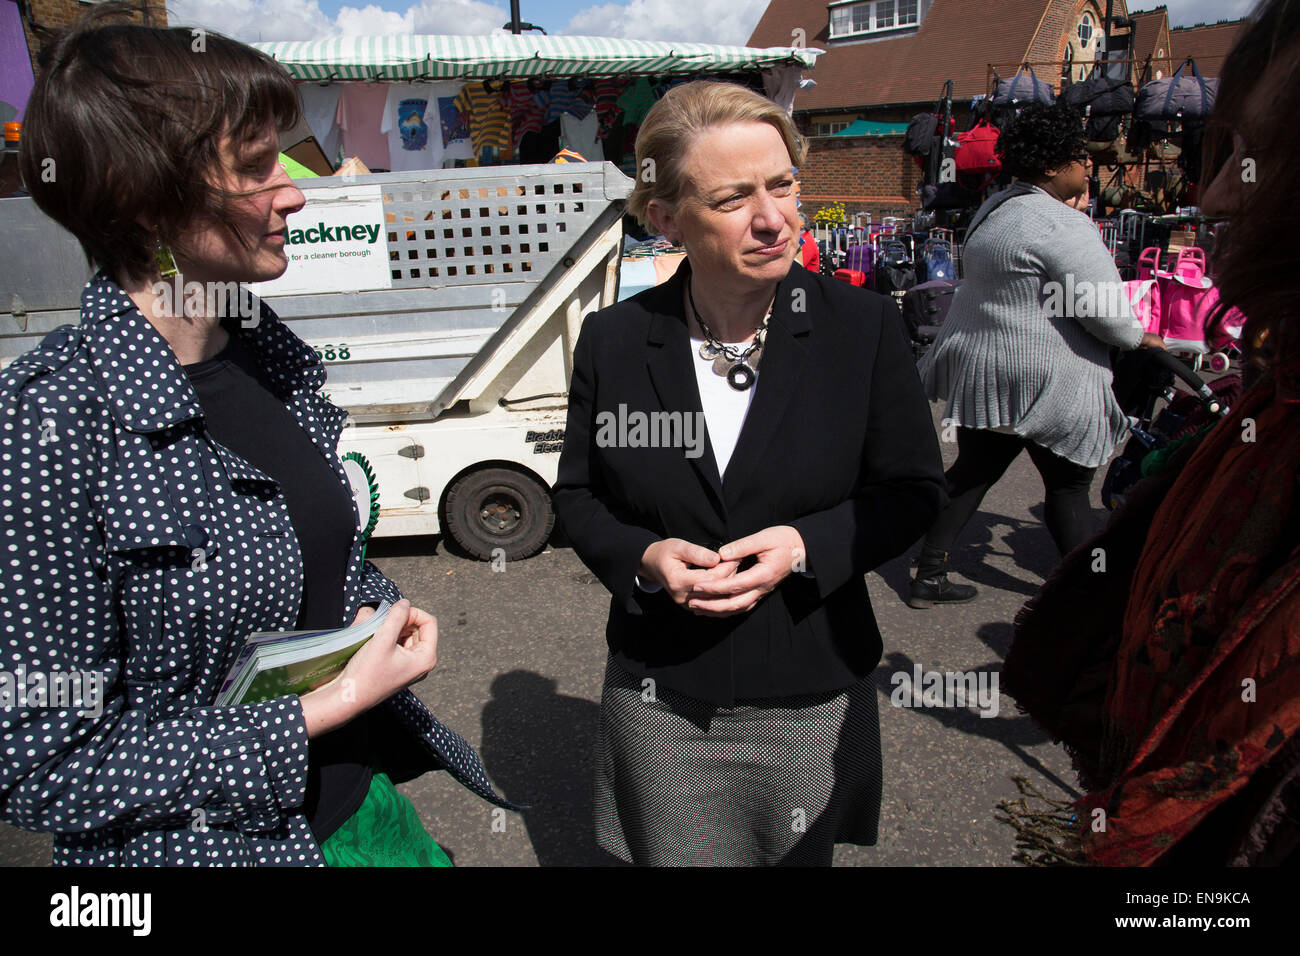 London, UK. Thursday 30th April 2015. Leader of the Green Party, Natalie Bennett pays a visit to talk to local people at Ridley Road Market in Dalston, Borough of Hackney, at the heart of multicultural East London. Natalie Bennett is an Australian-born British politician and journalist. She was elected to her position as the leader of the Green Party of England and Wales in 2012. Credit:  Michael Kemp/Alamy Live News Stock Photo